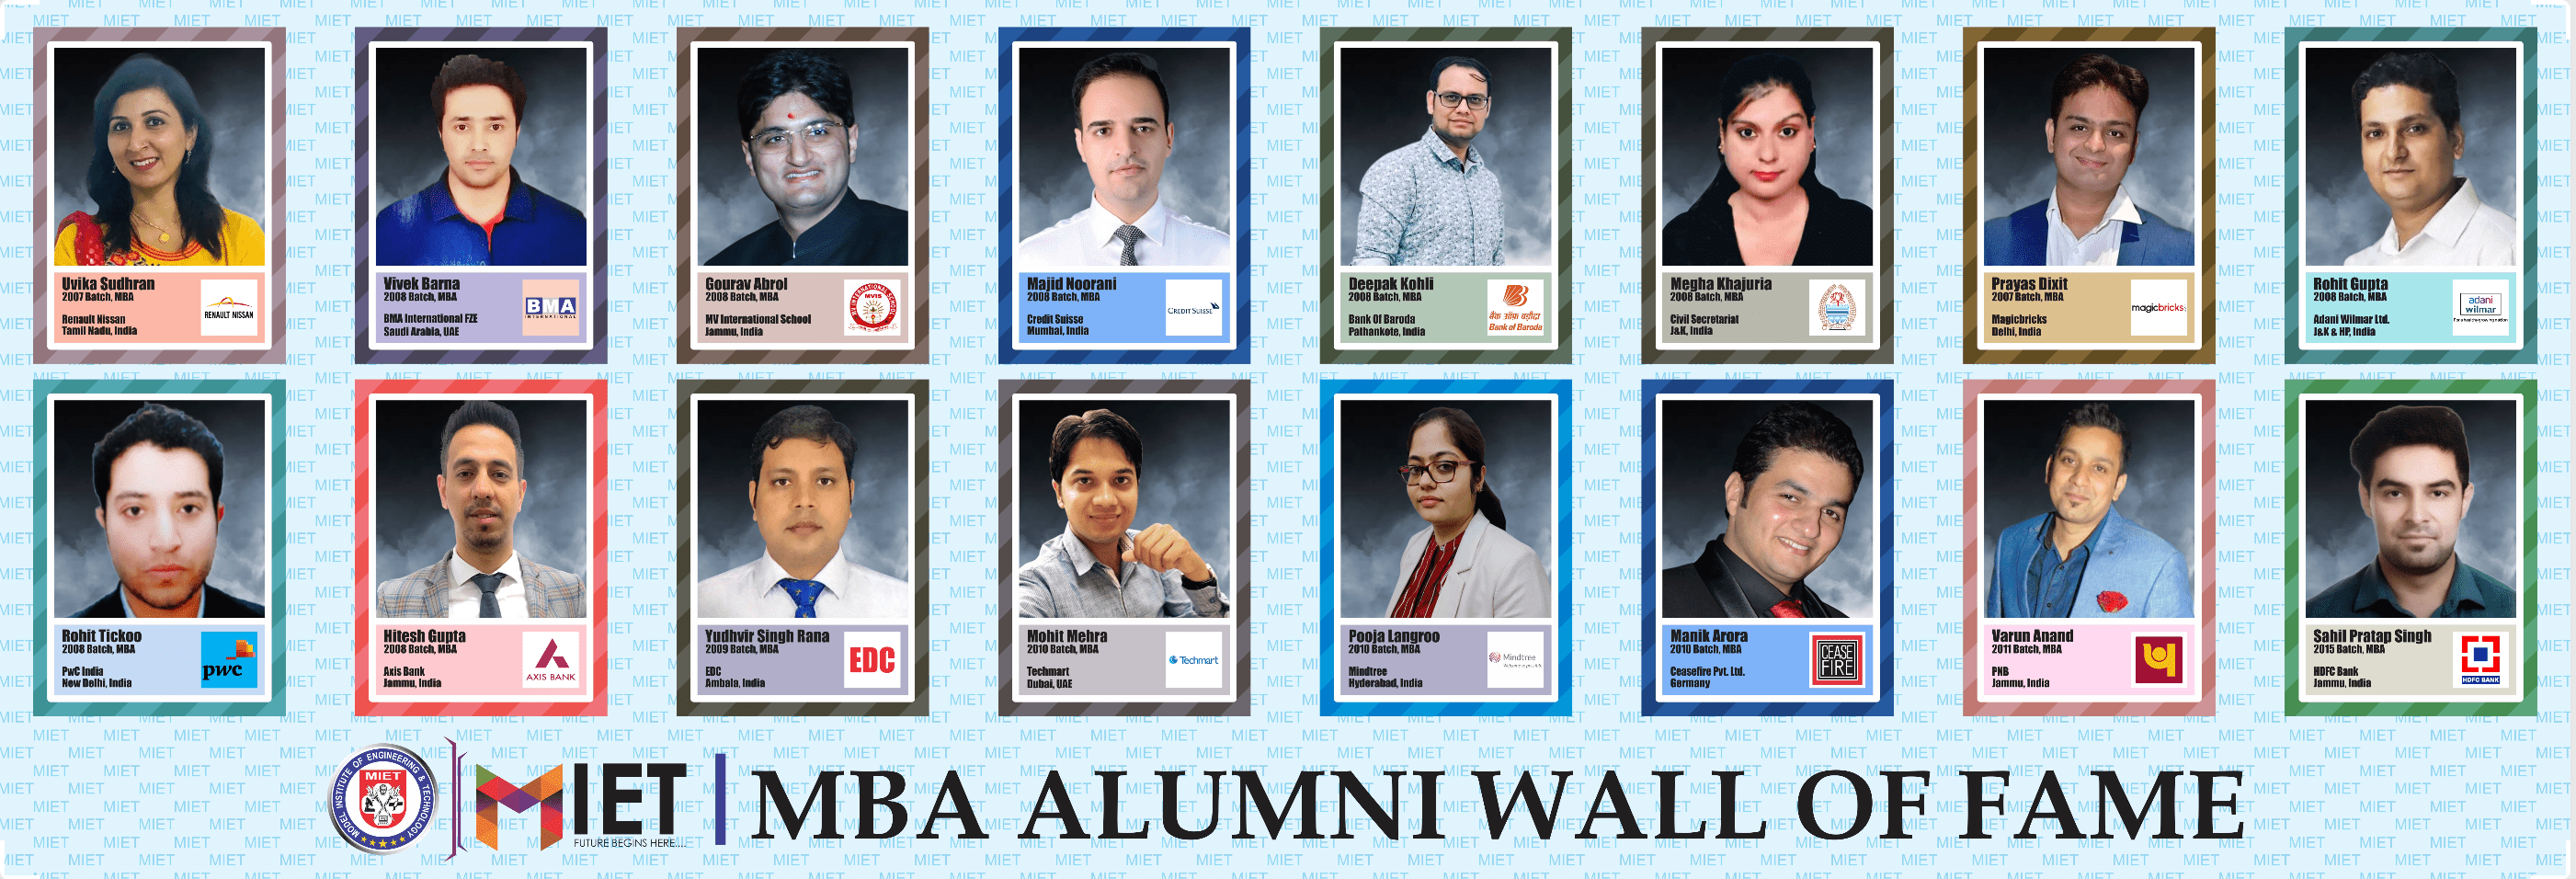 MBA wall of fame min